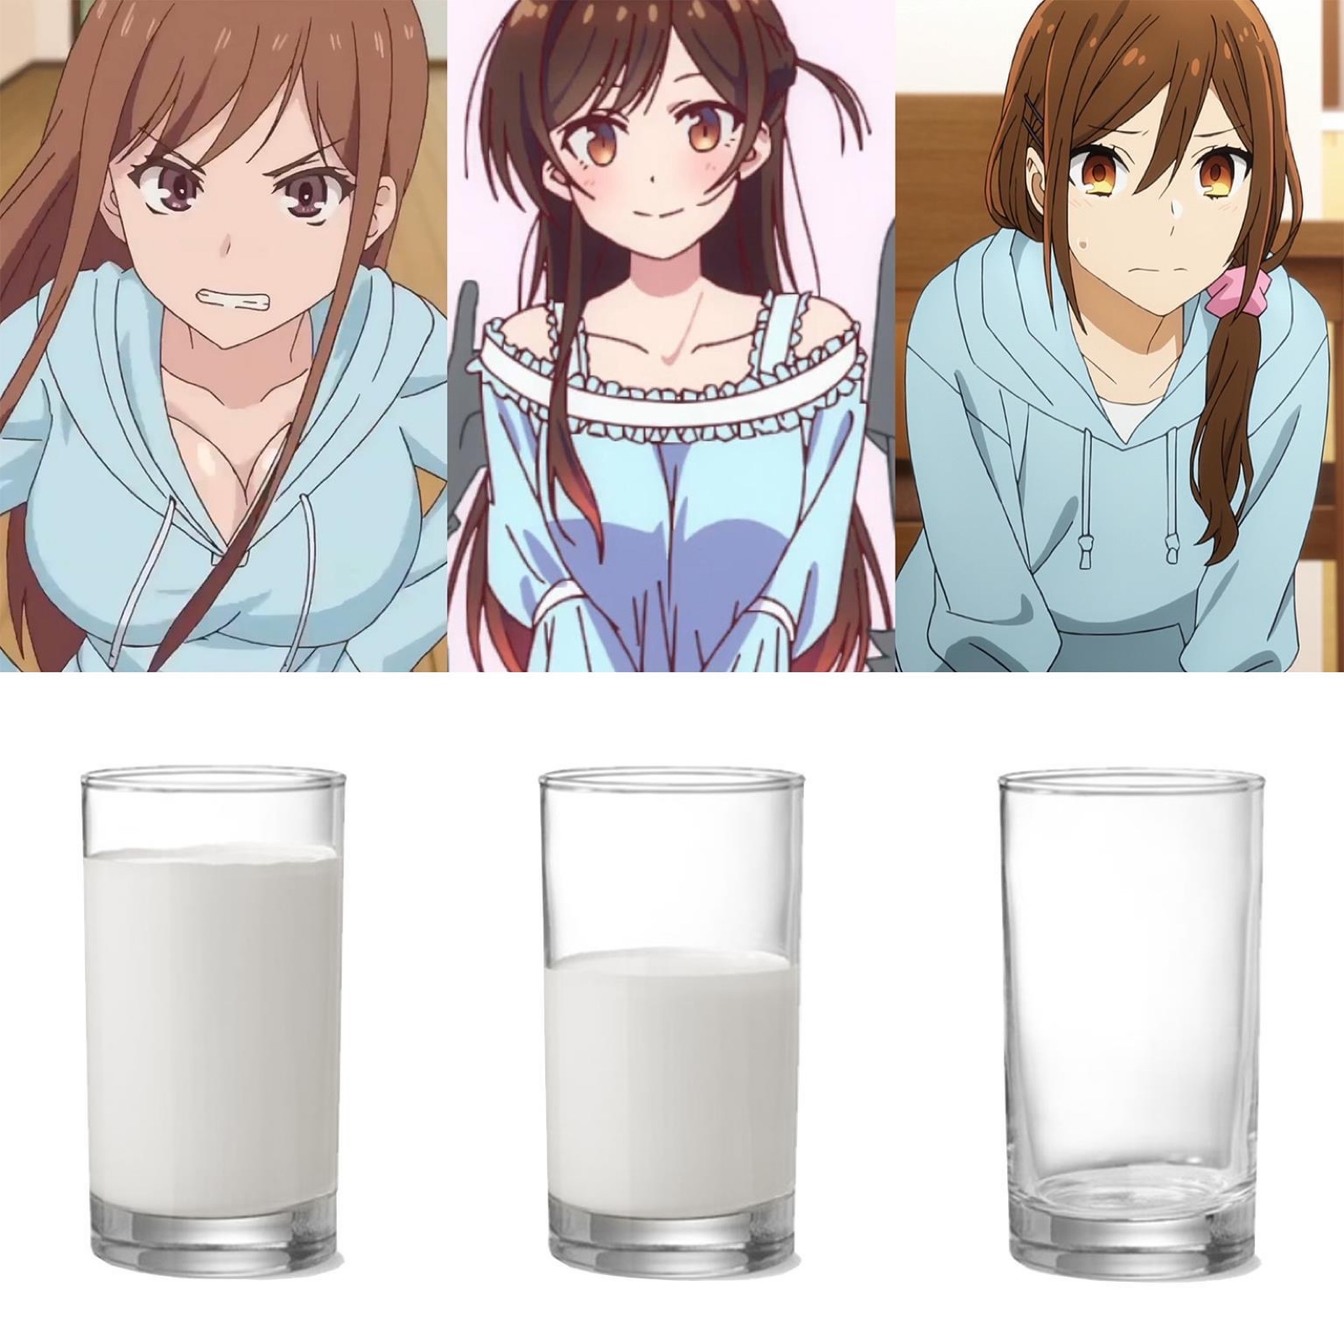 milk is good for you - meme